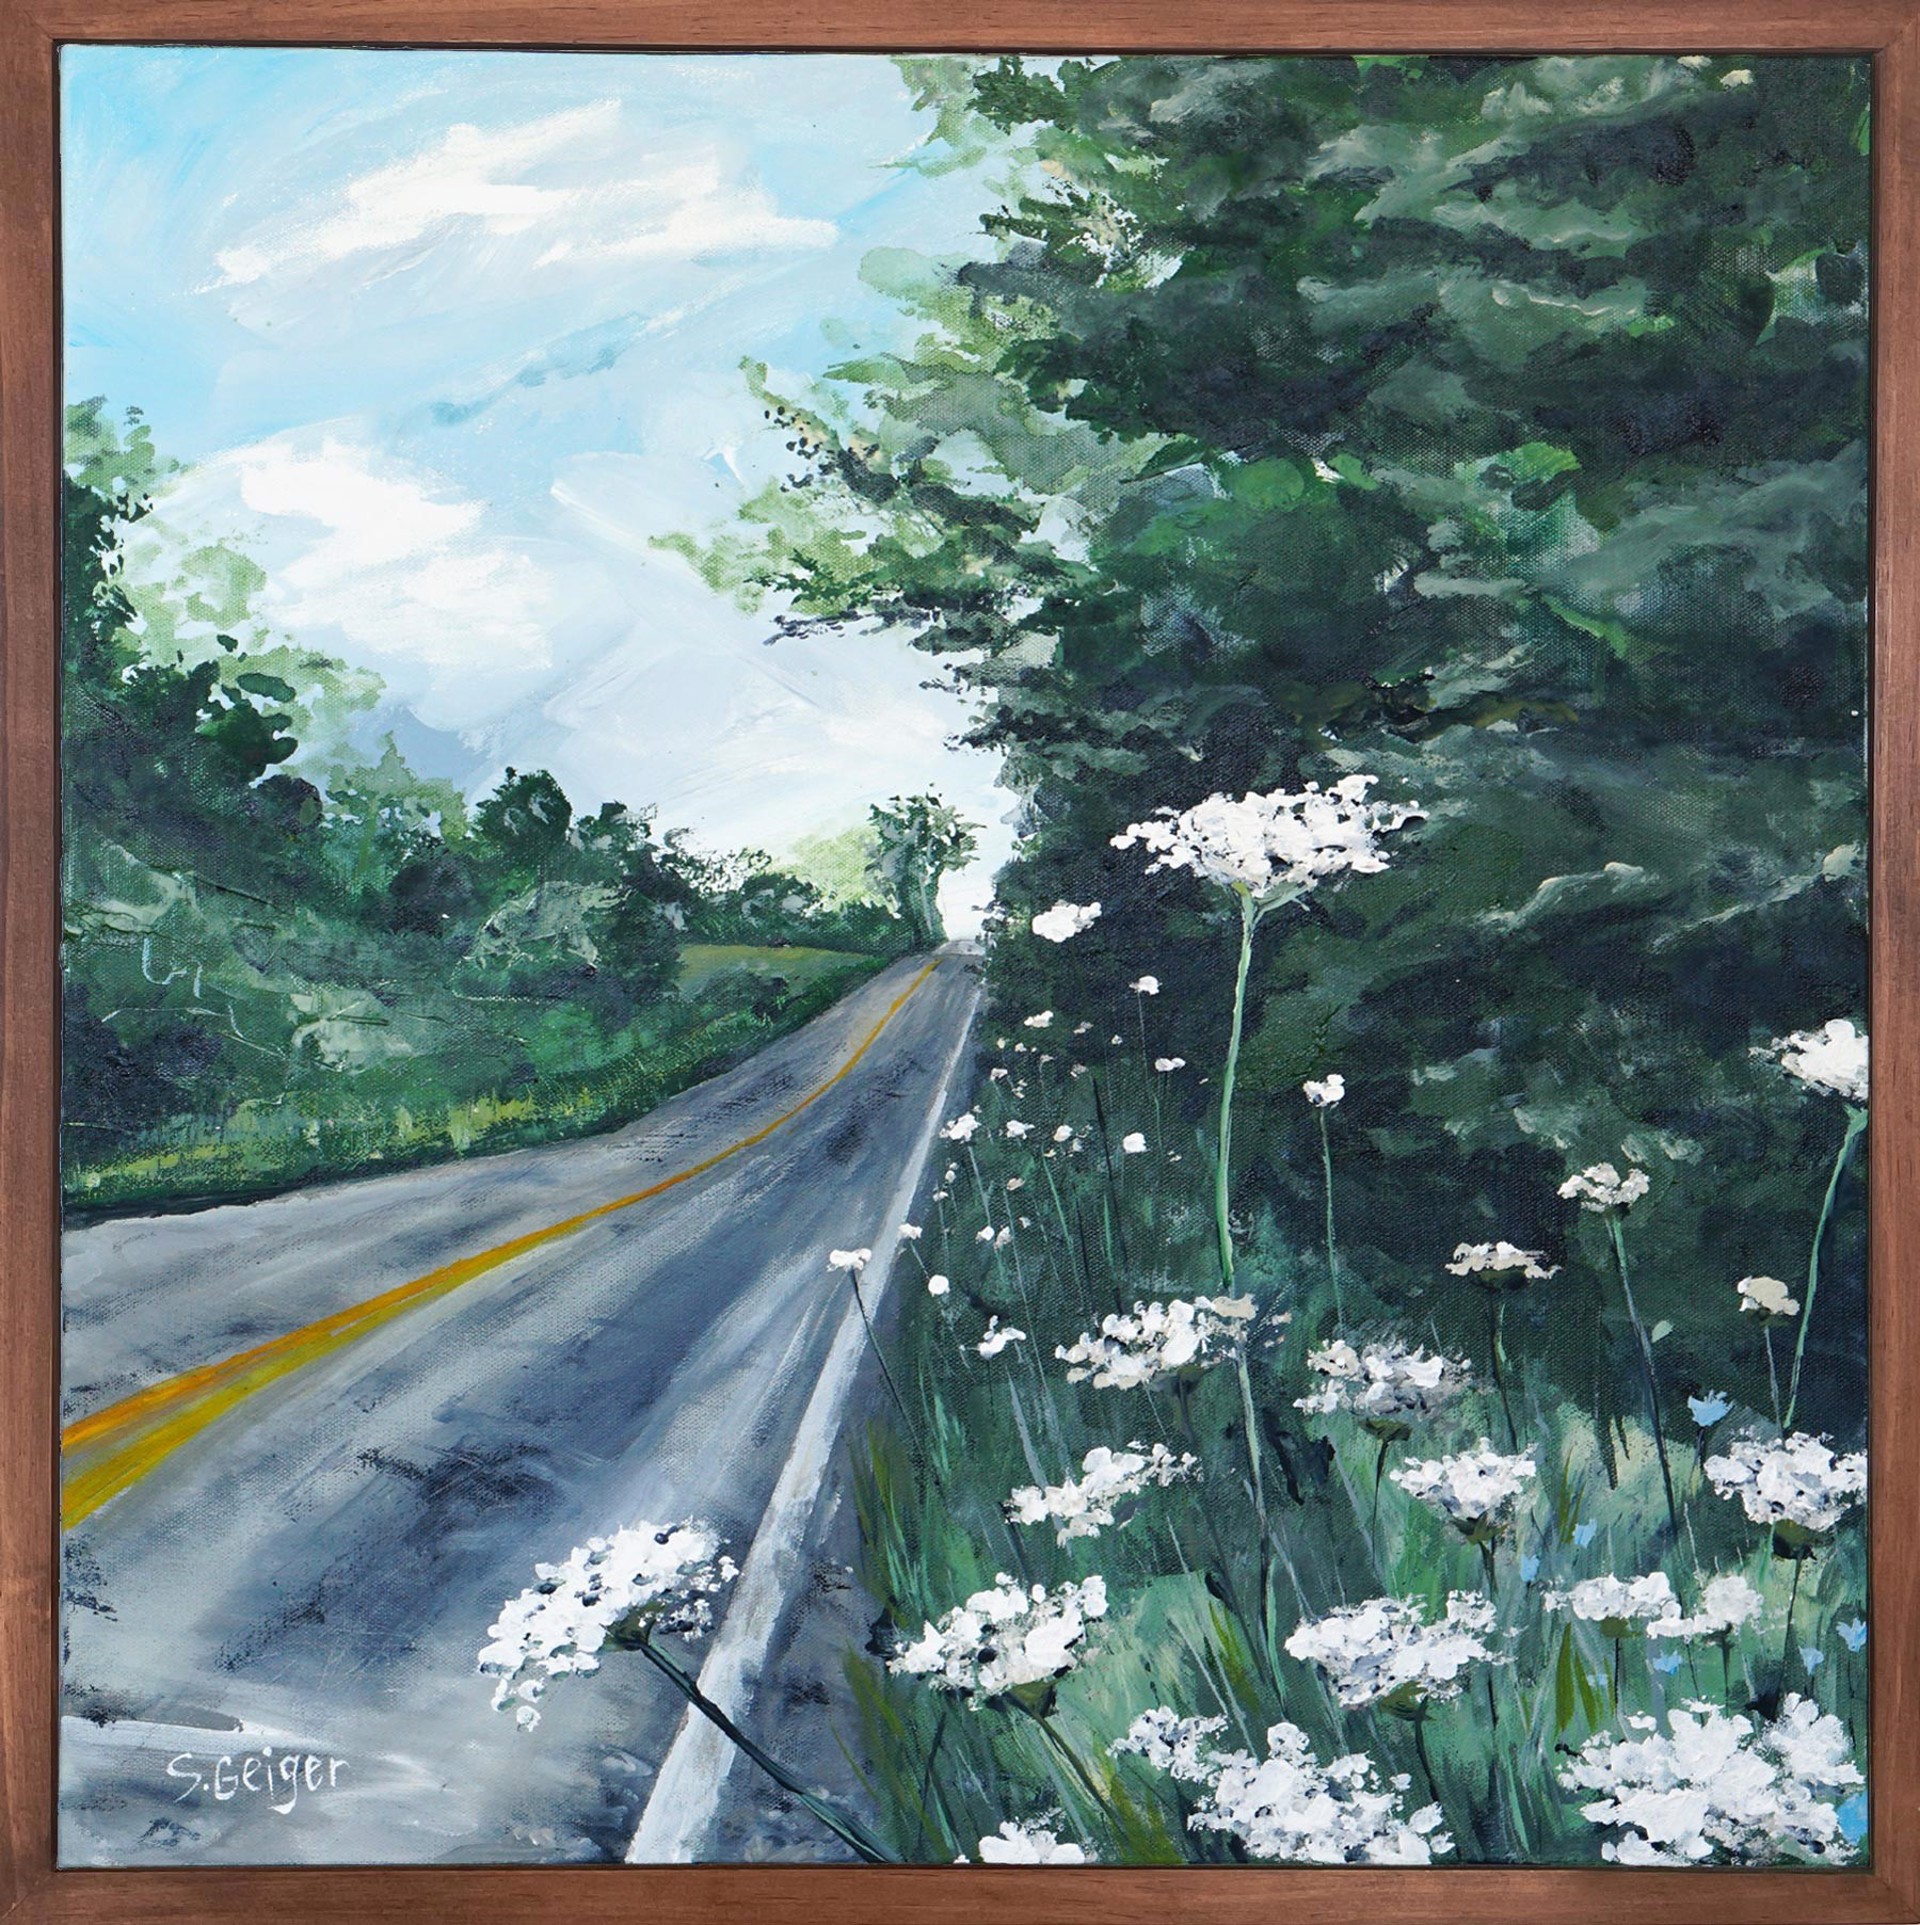 County Road Wildflowers by Susan Geiger